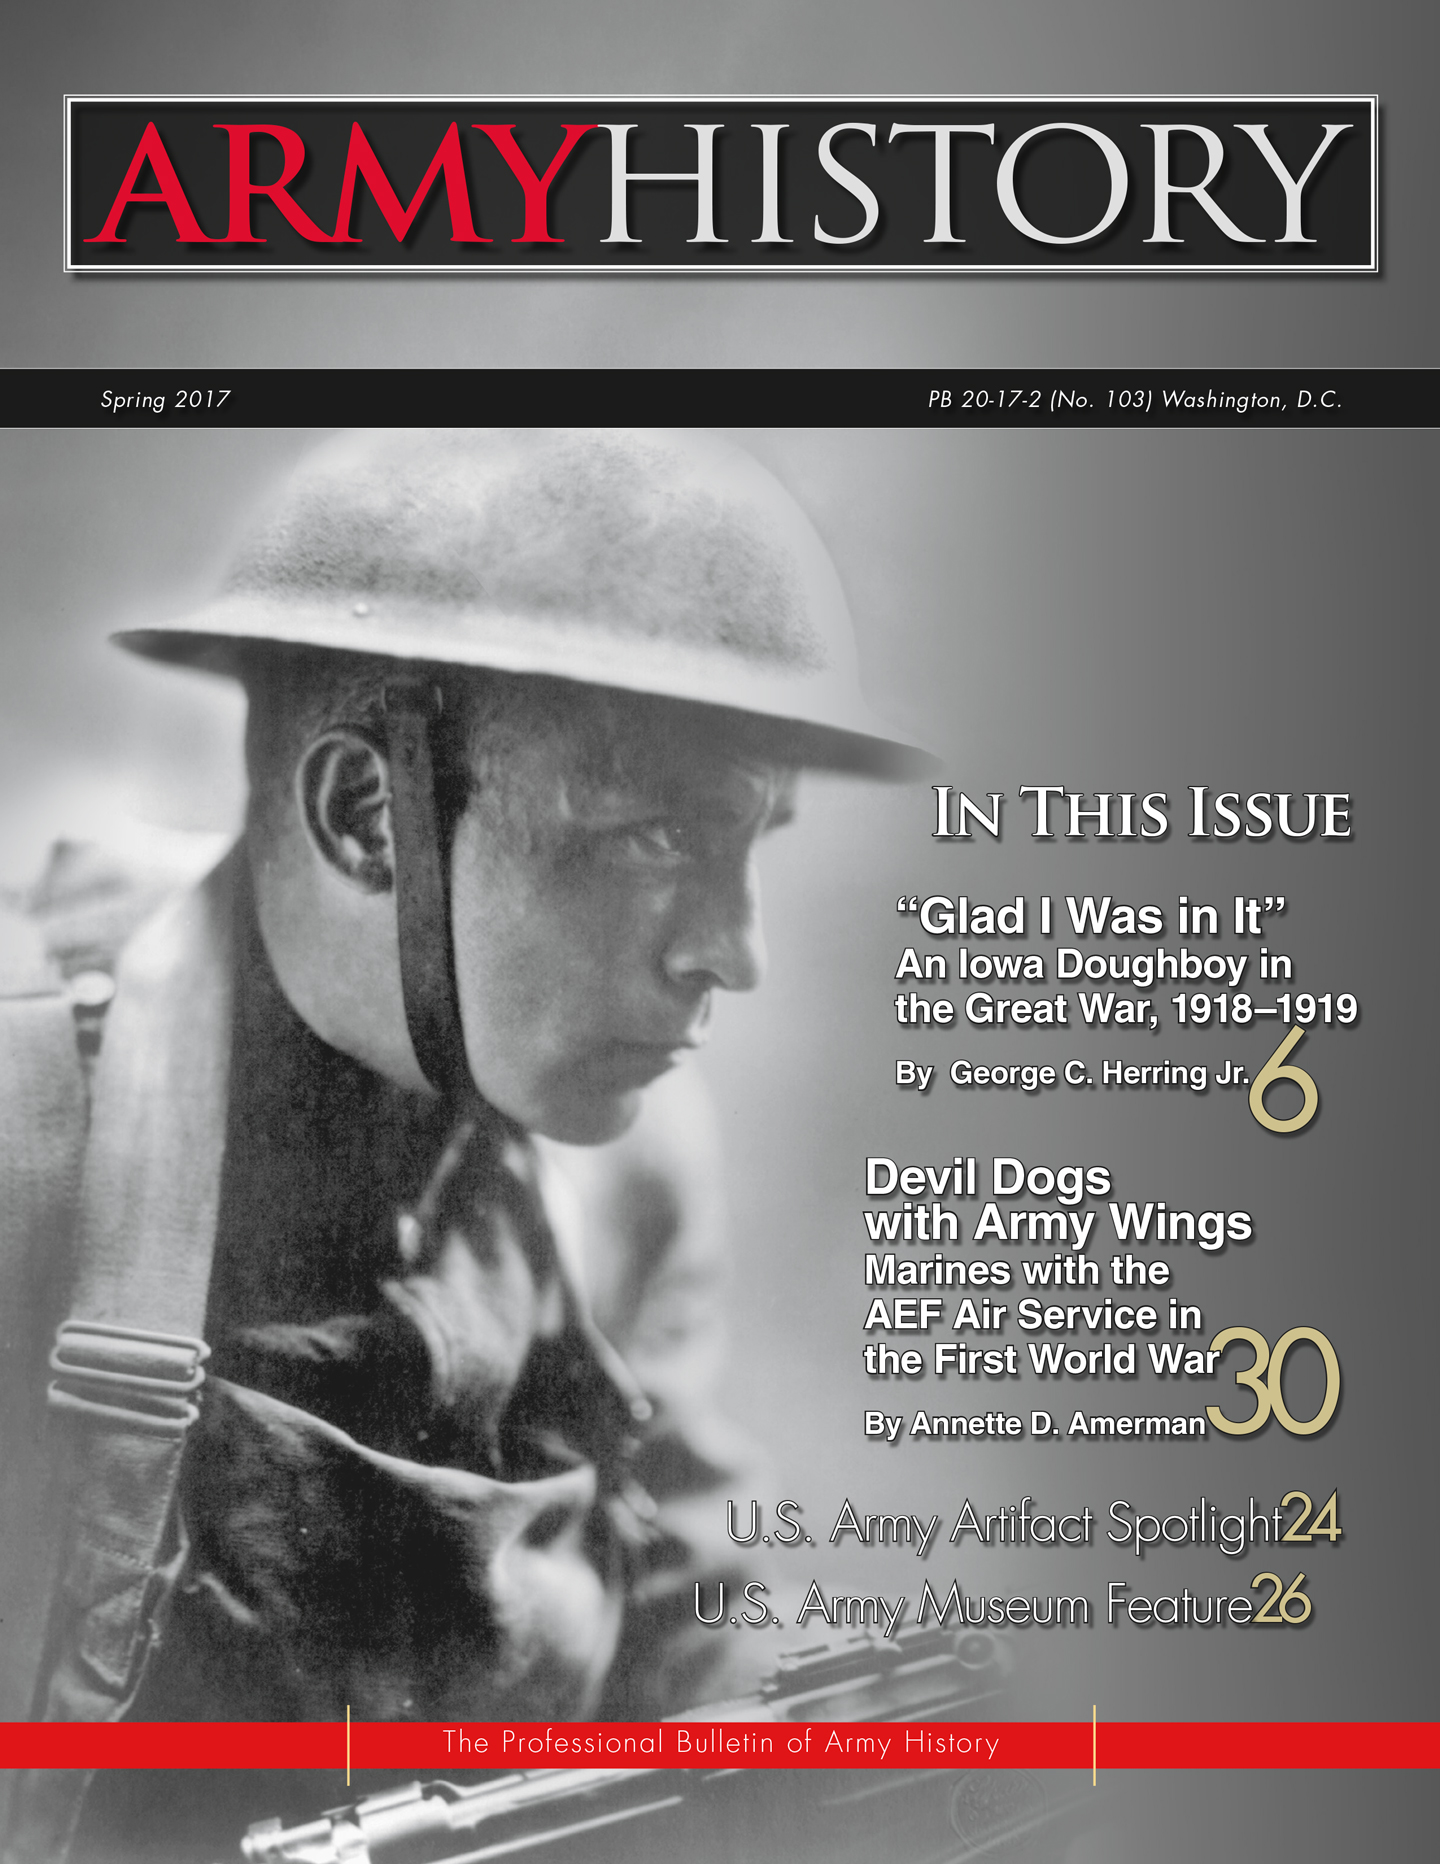 Army History, Issue 103, Spring 2017